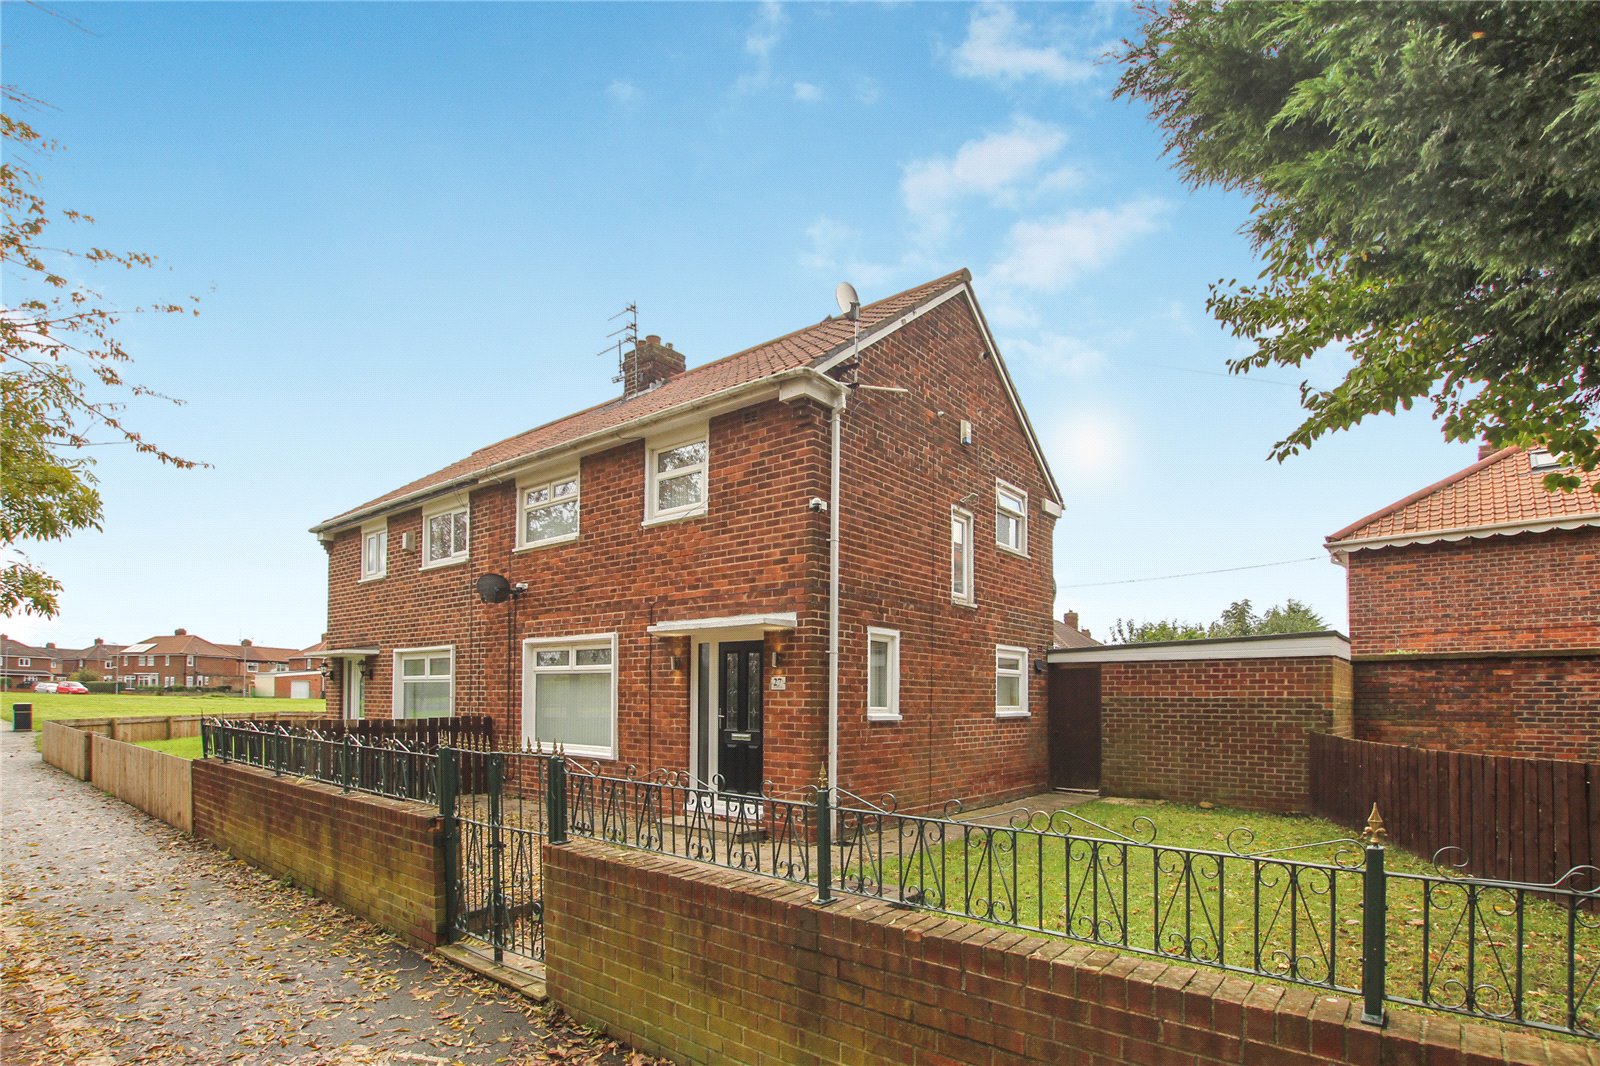 3 bed  for sale in Kelvin Grove, Park End  - Property Image 18